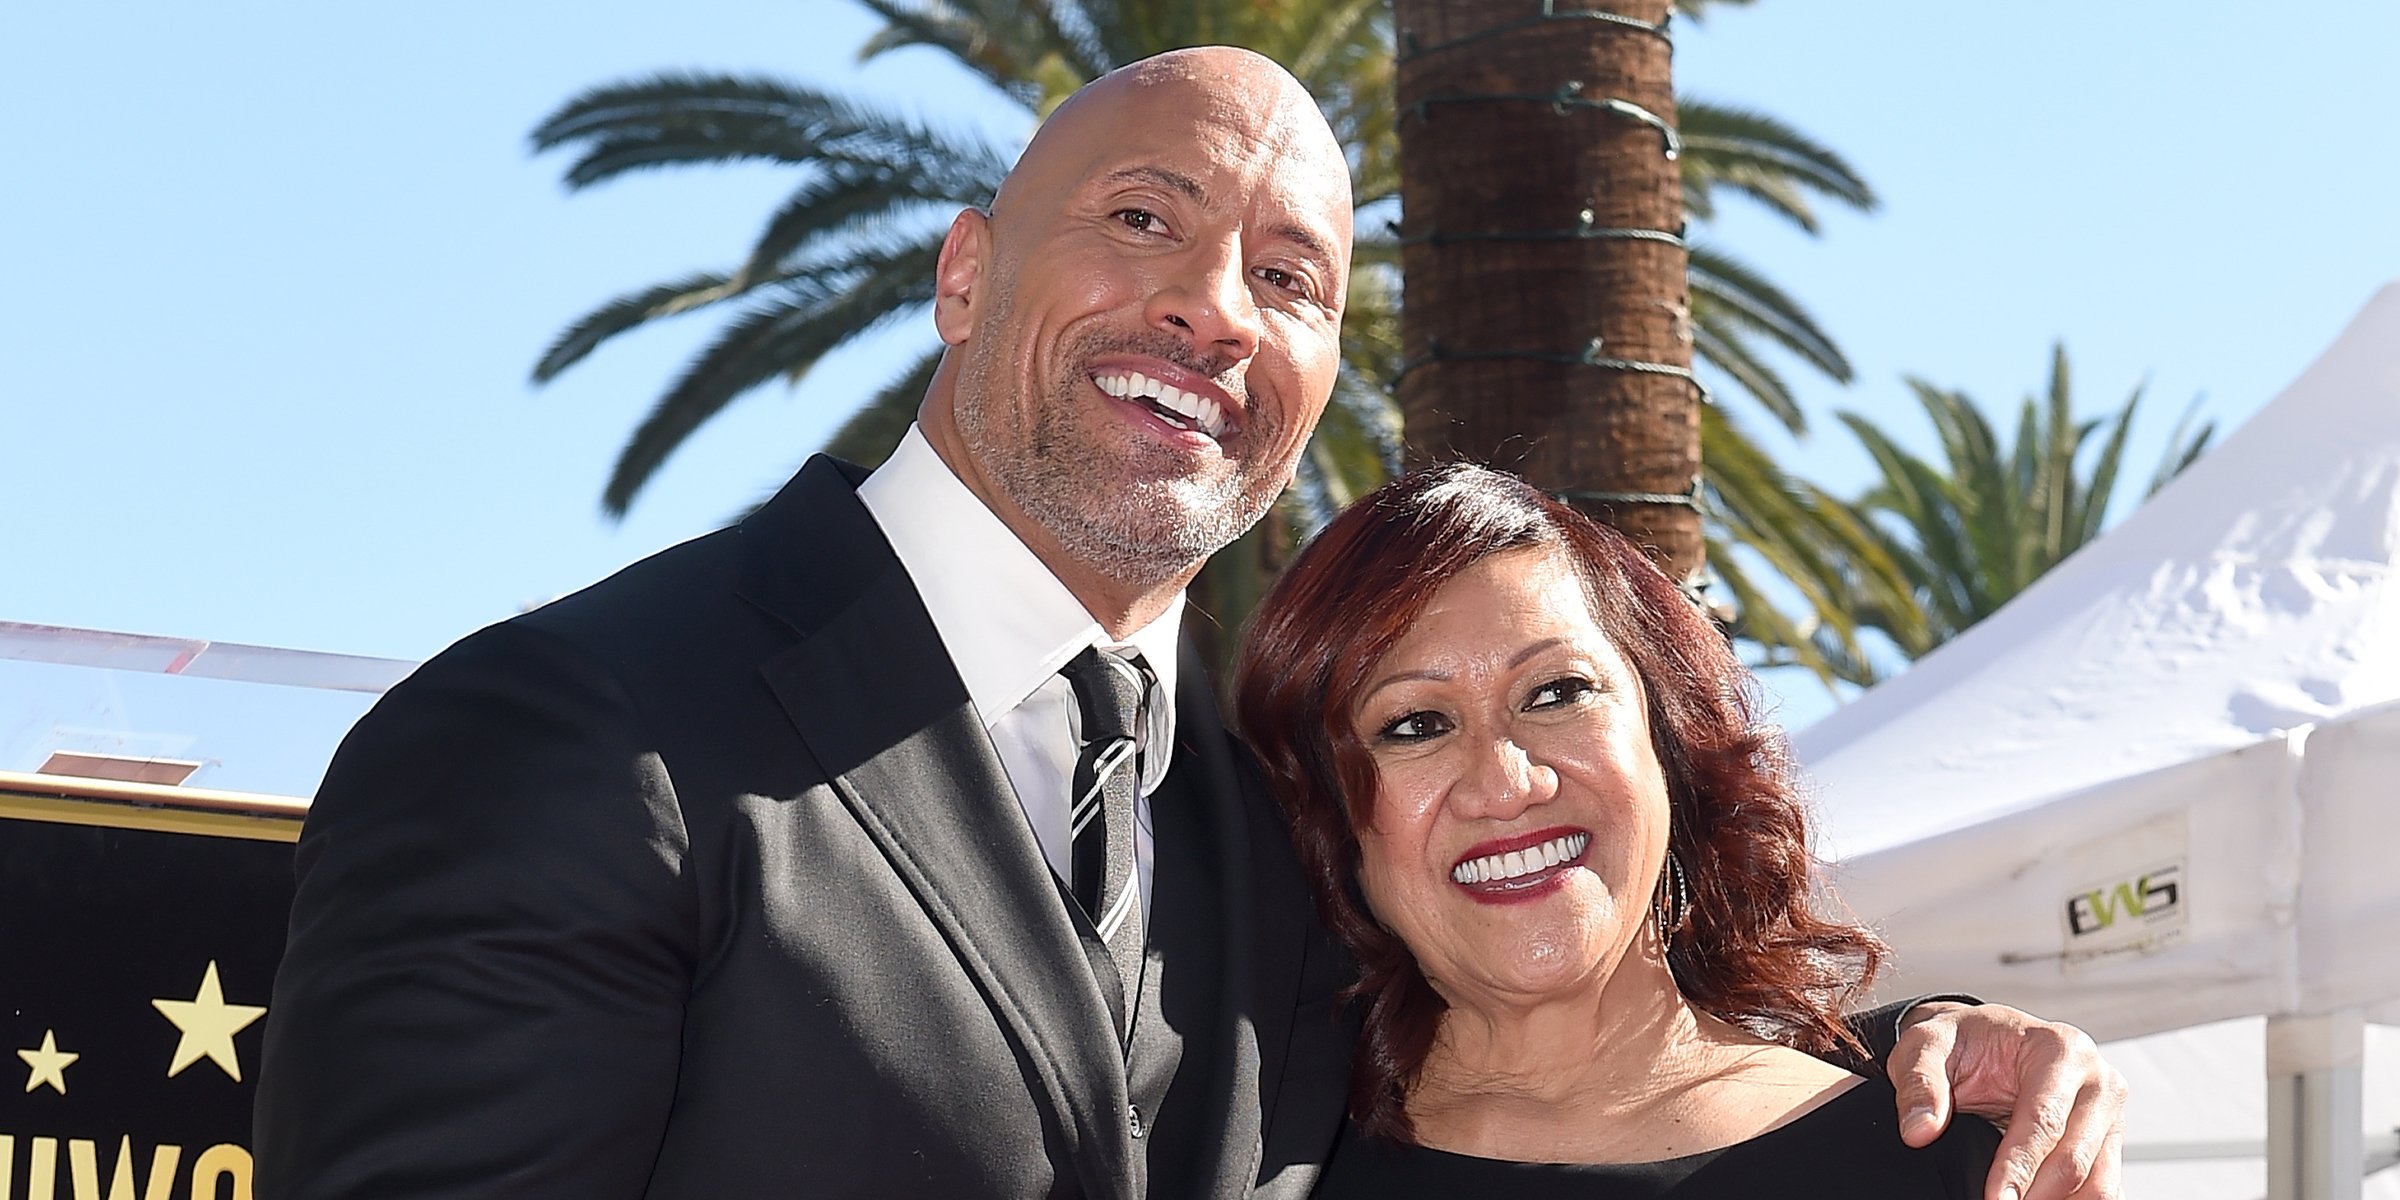 Dwayne Johnson and His Mom | Source: Getty images